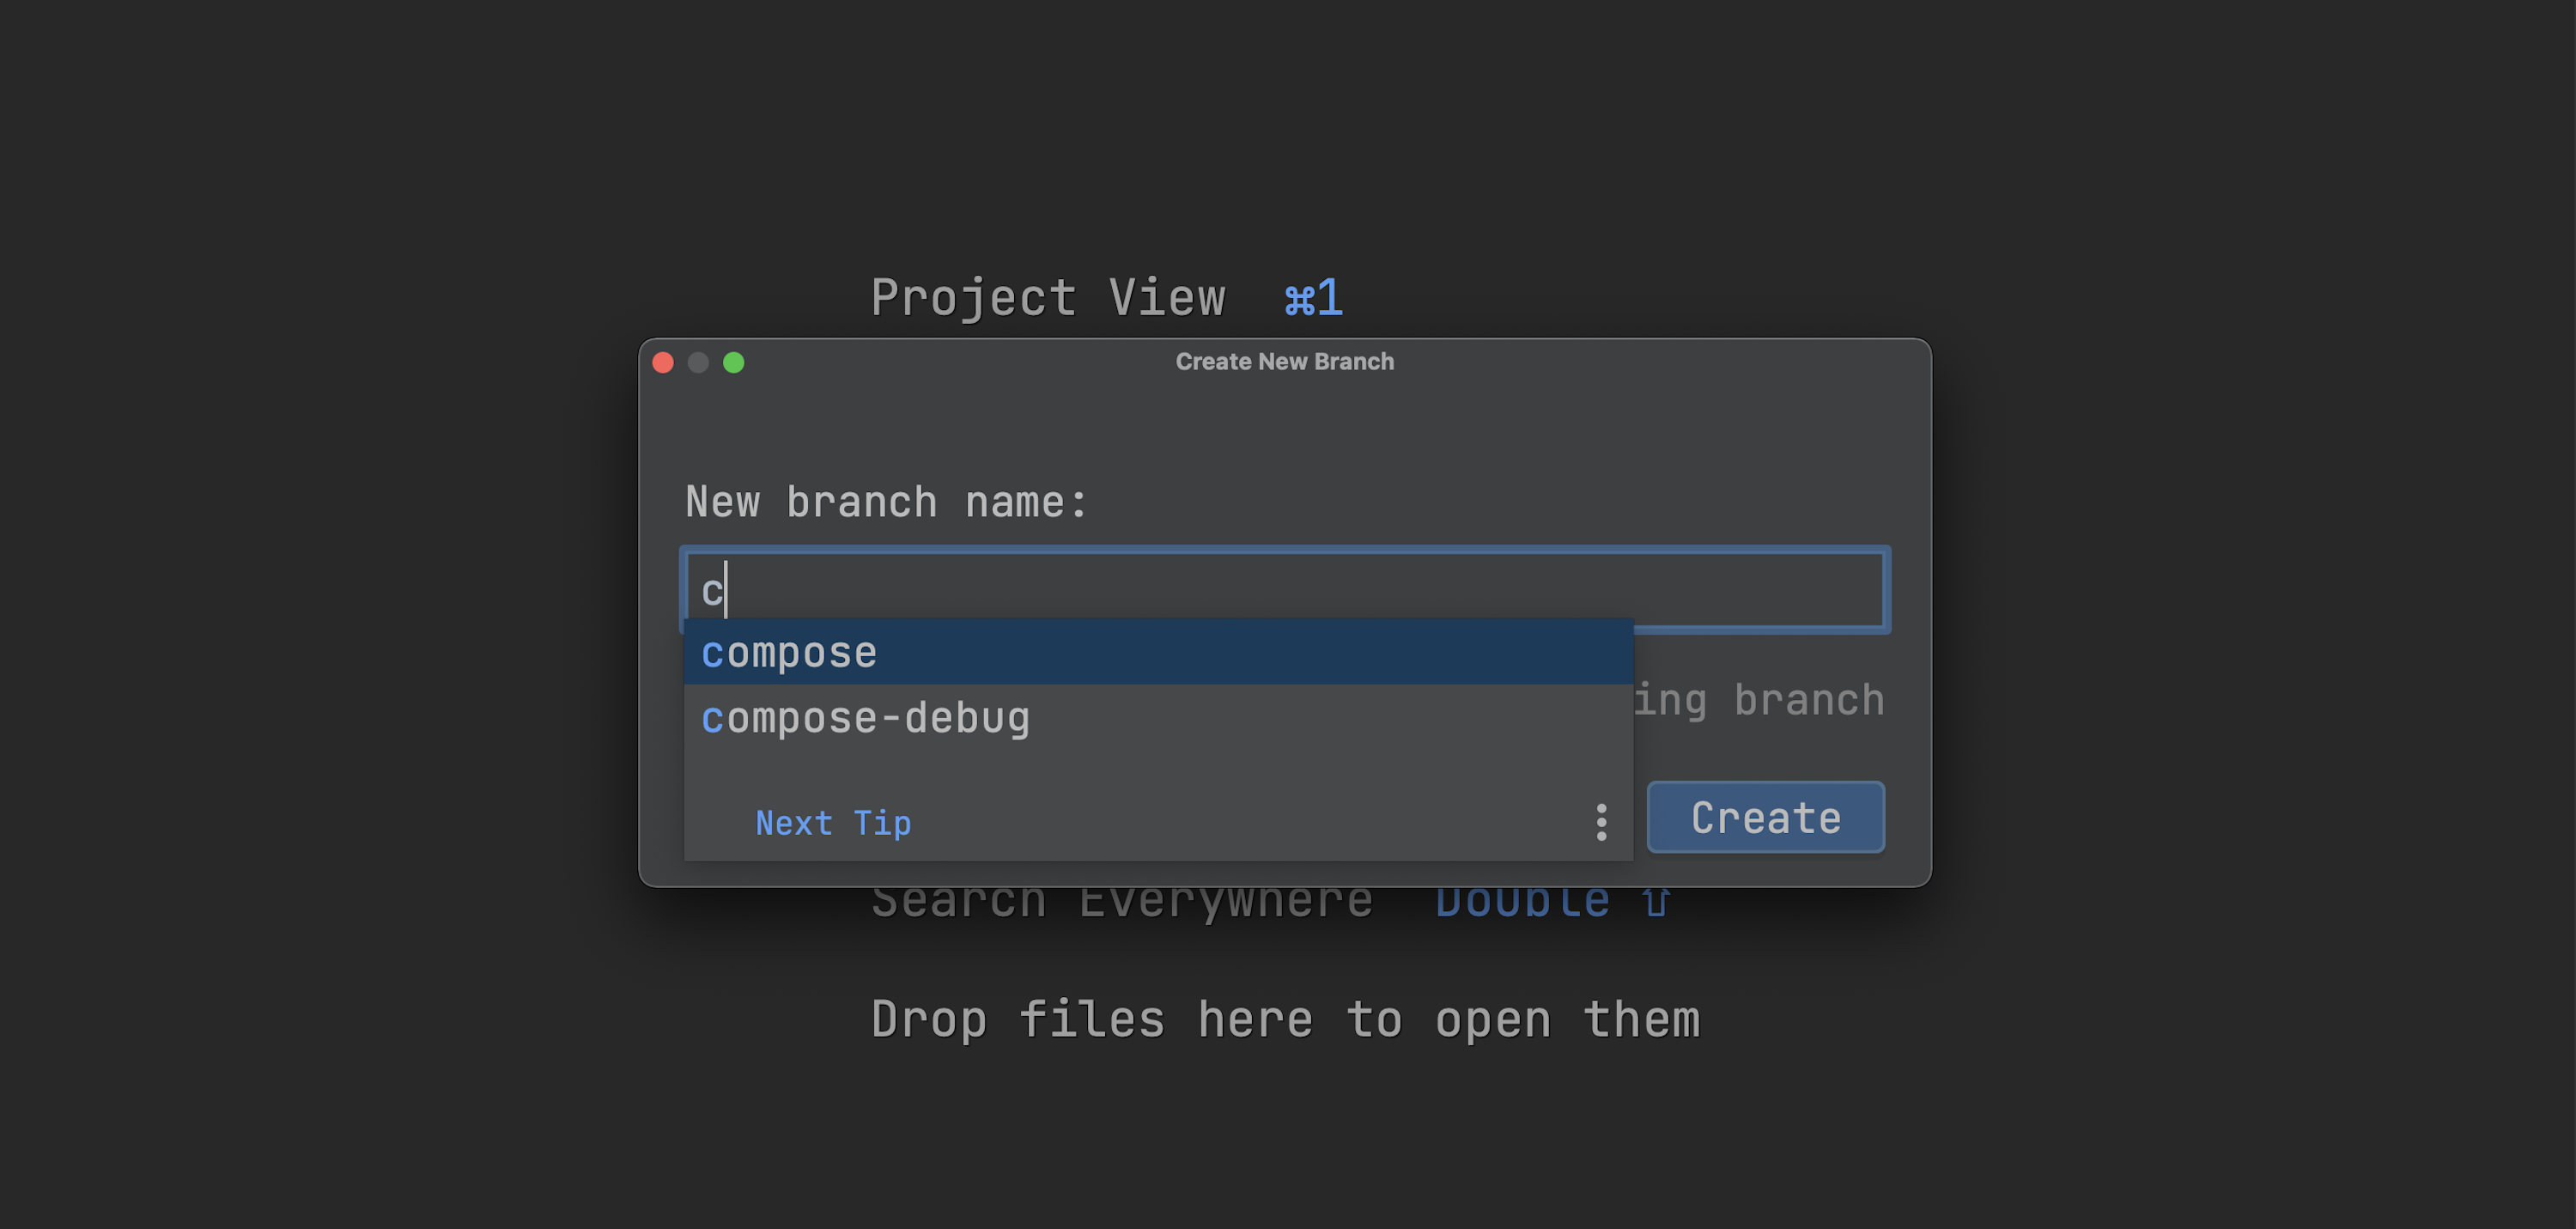 Using completion in the Create New Branch popup window